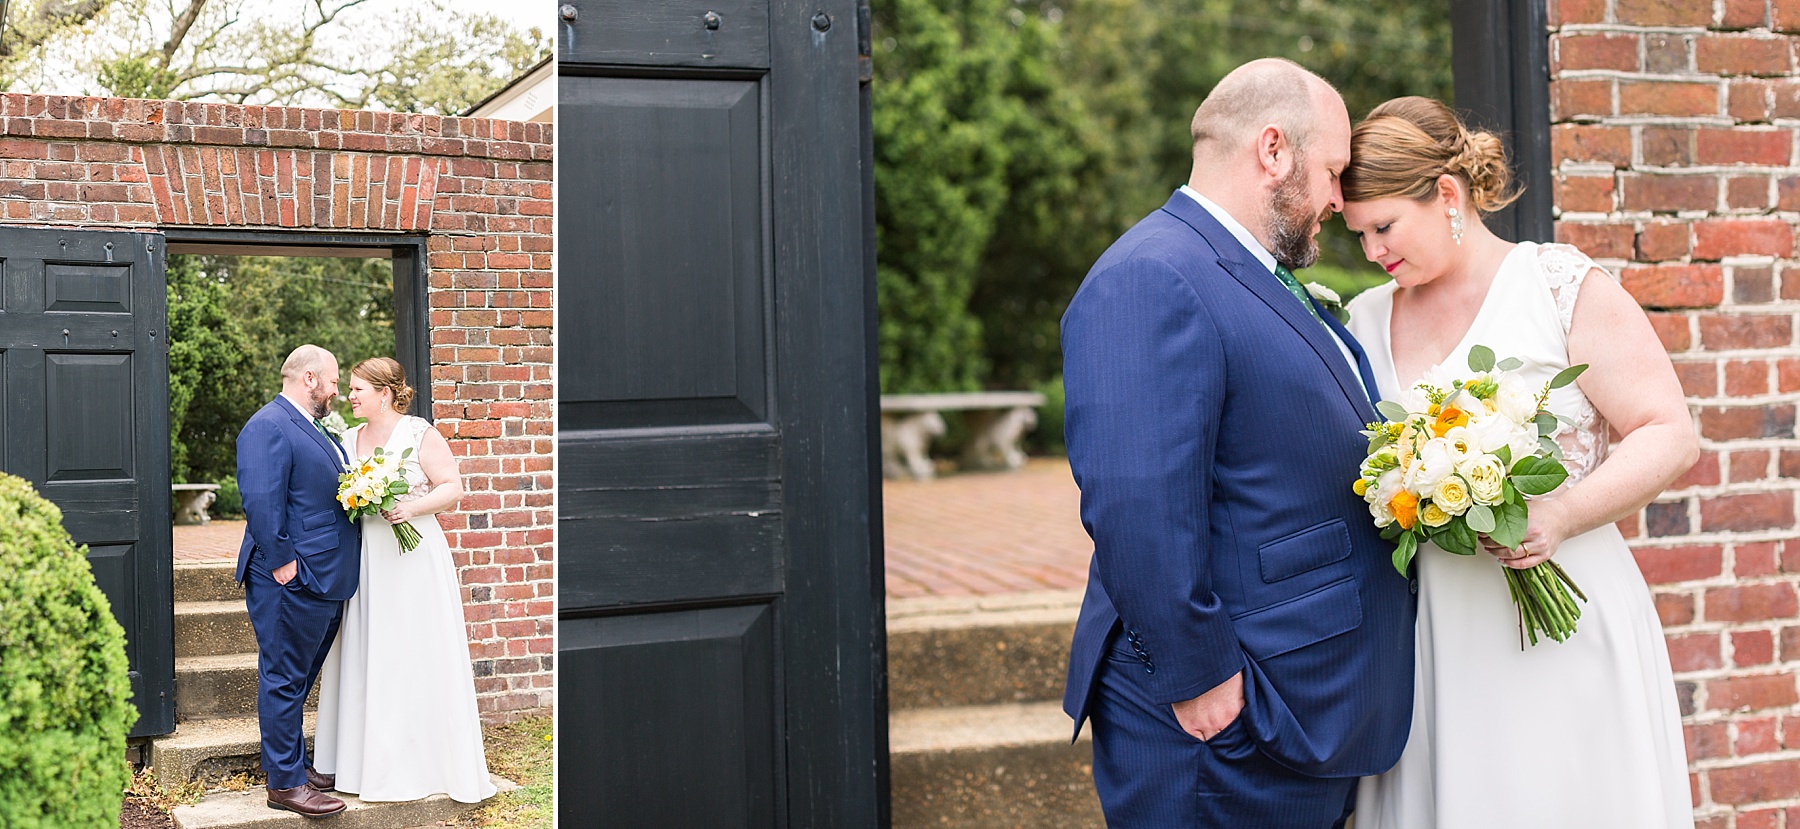 spring wedding portraits at Woodlawn and Pope Leighy House with Alexandra Mandato Photography